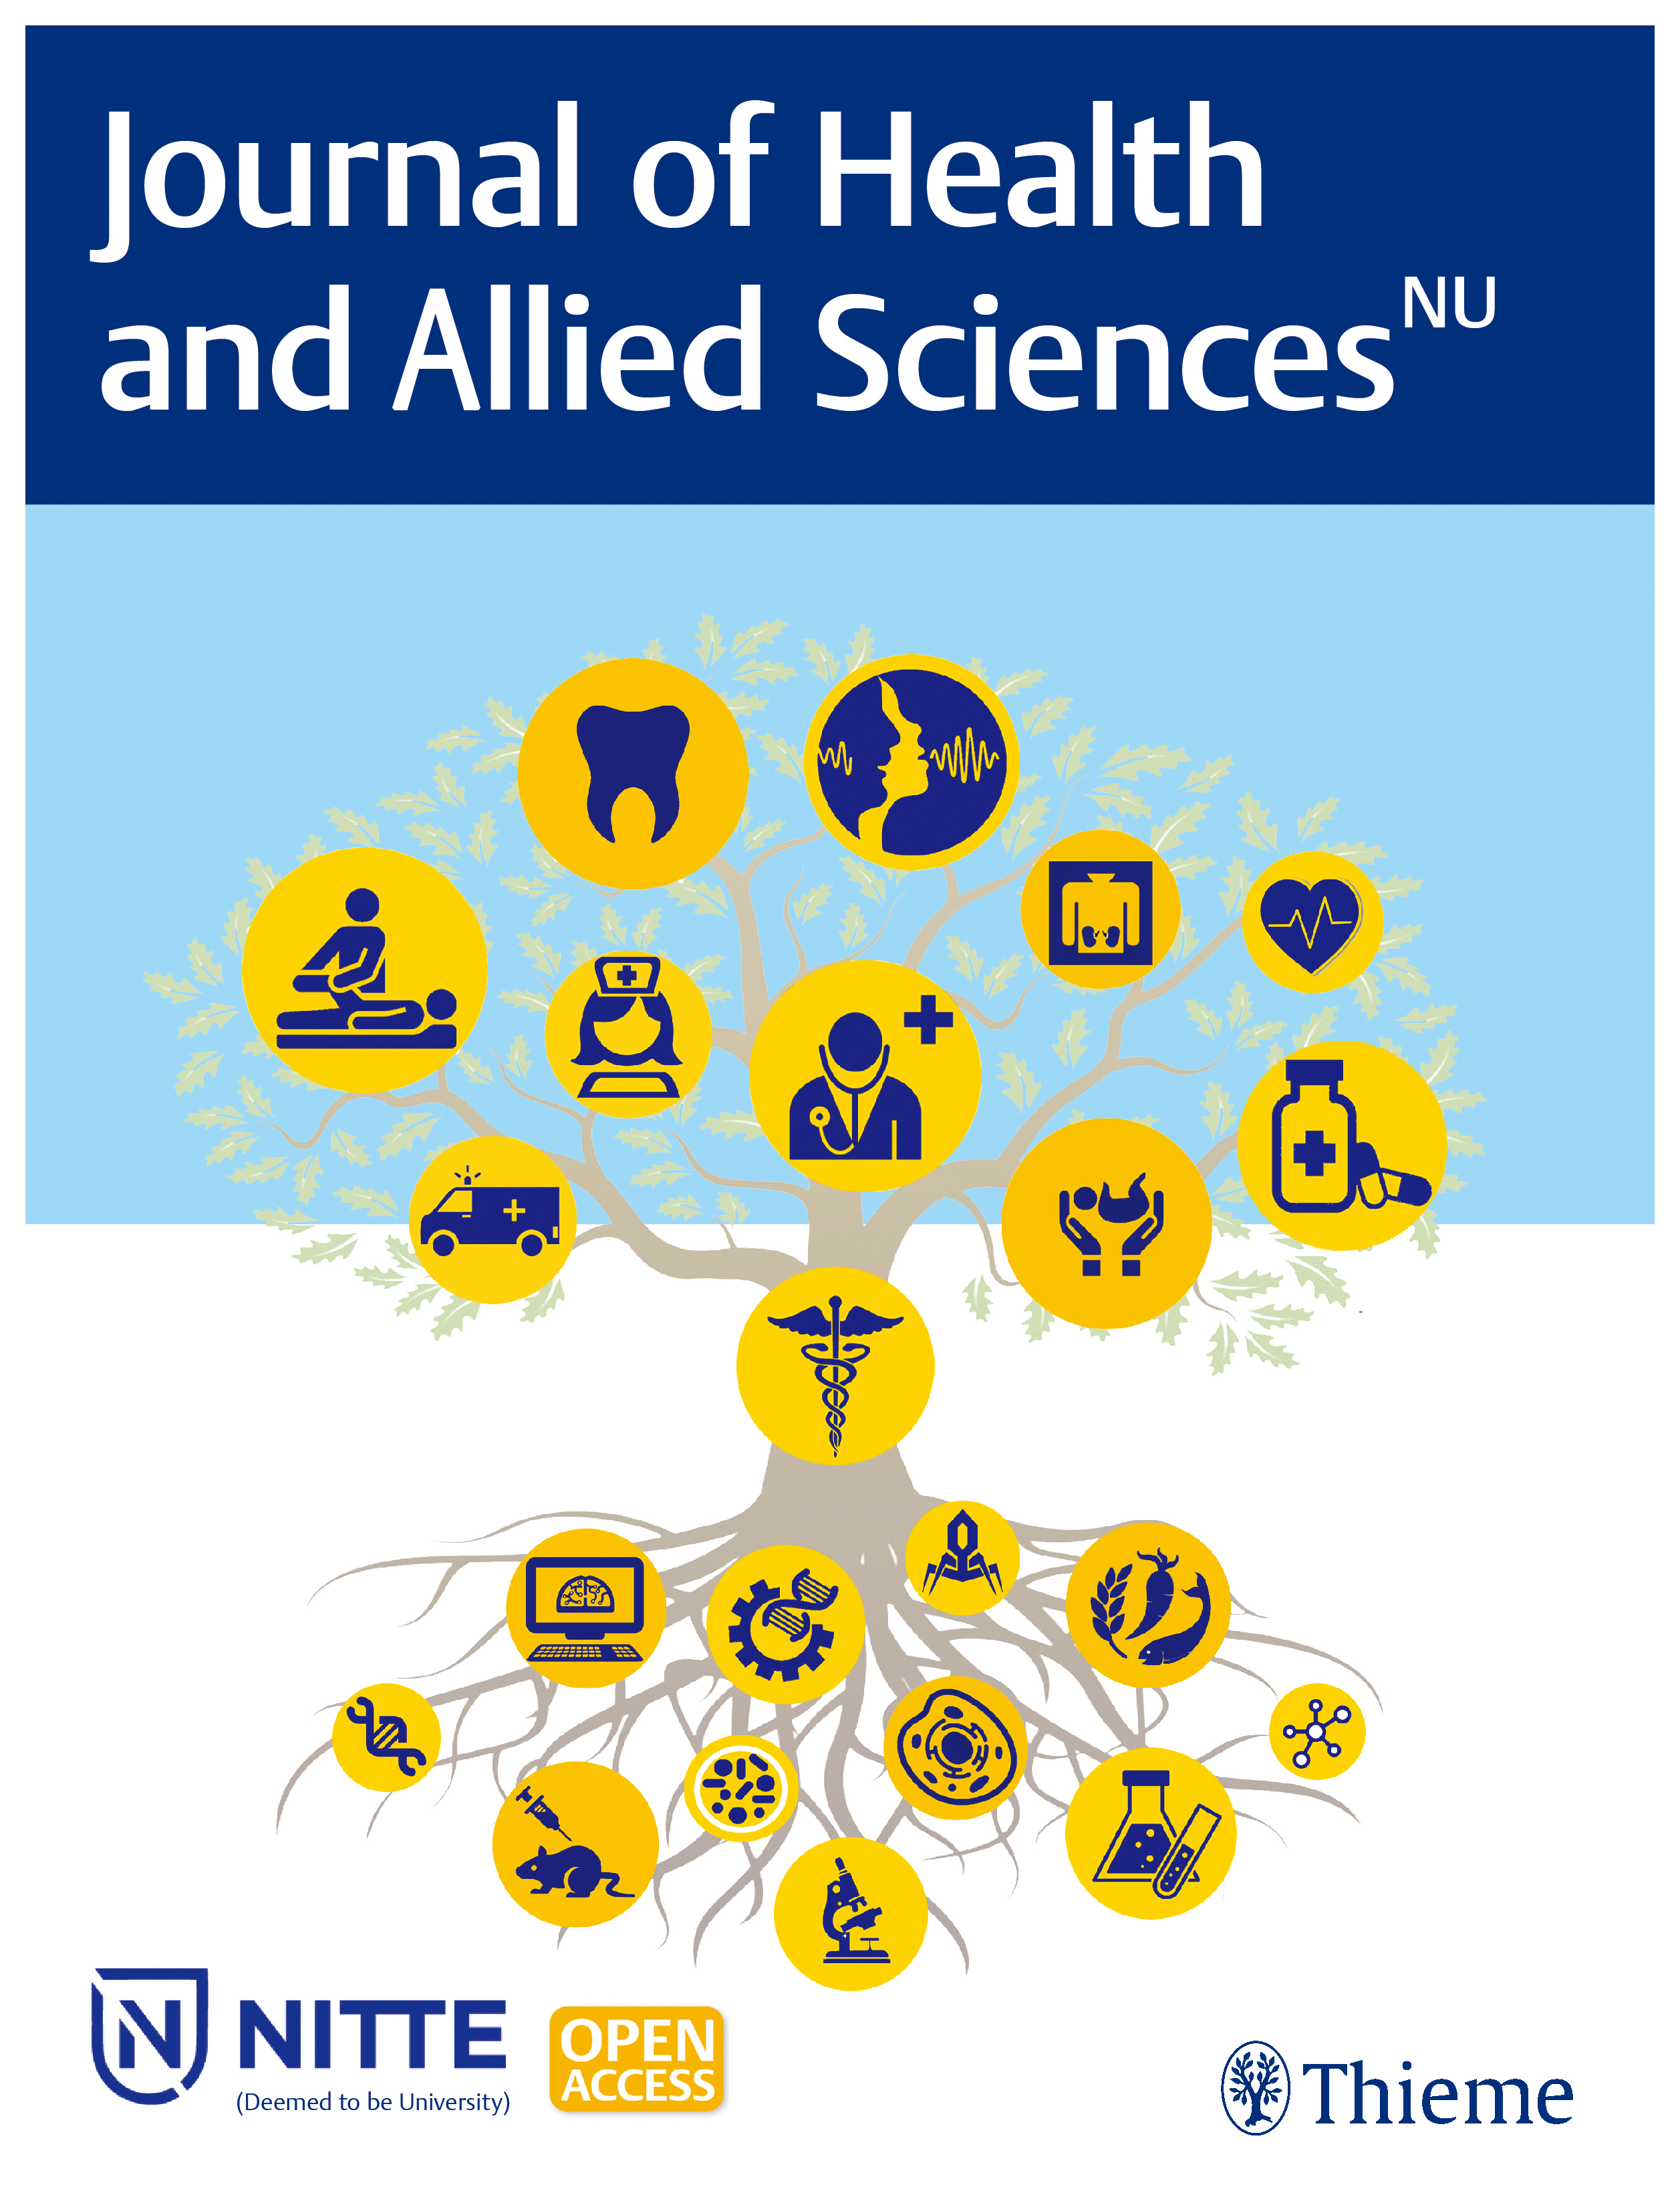 Journal of Health and Allied Sciences